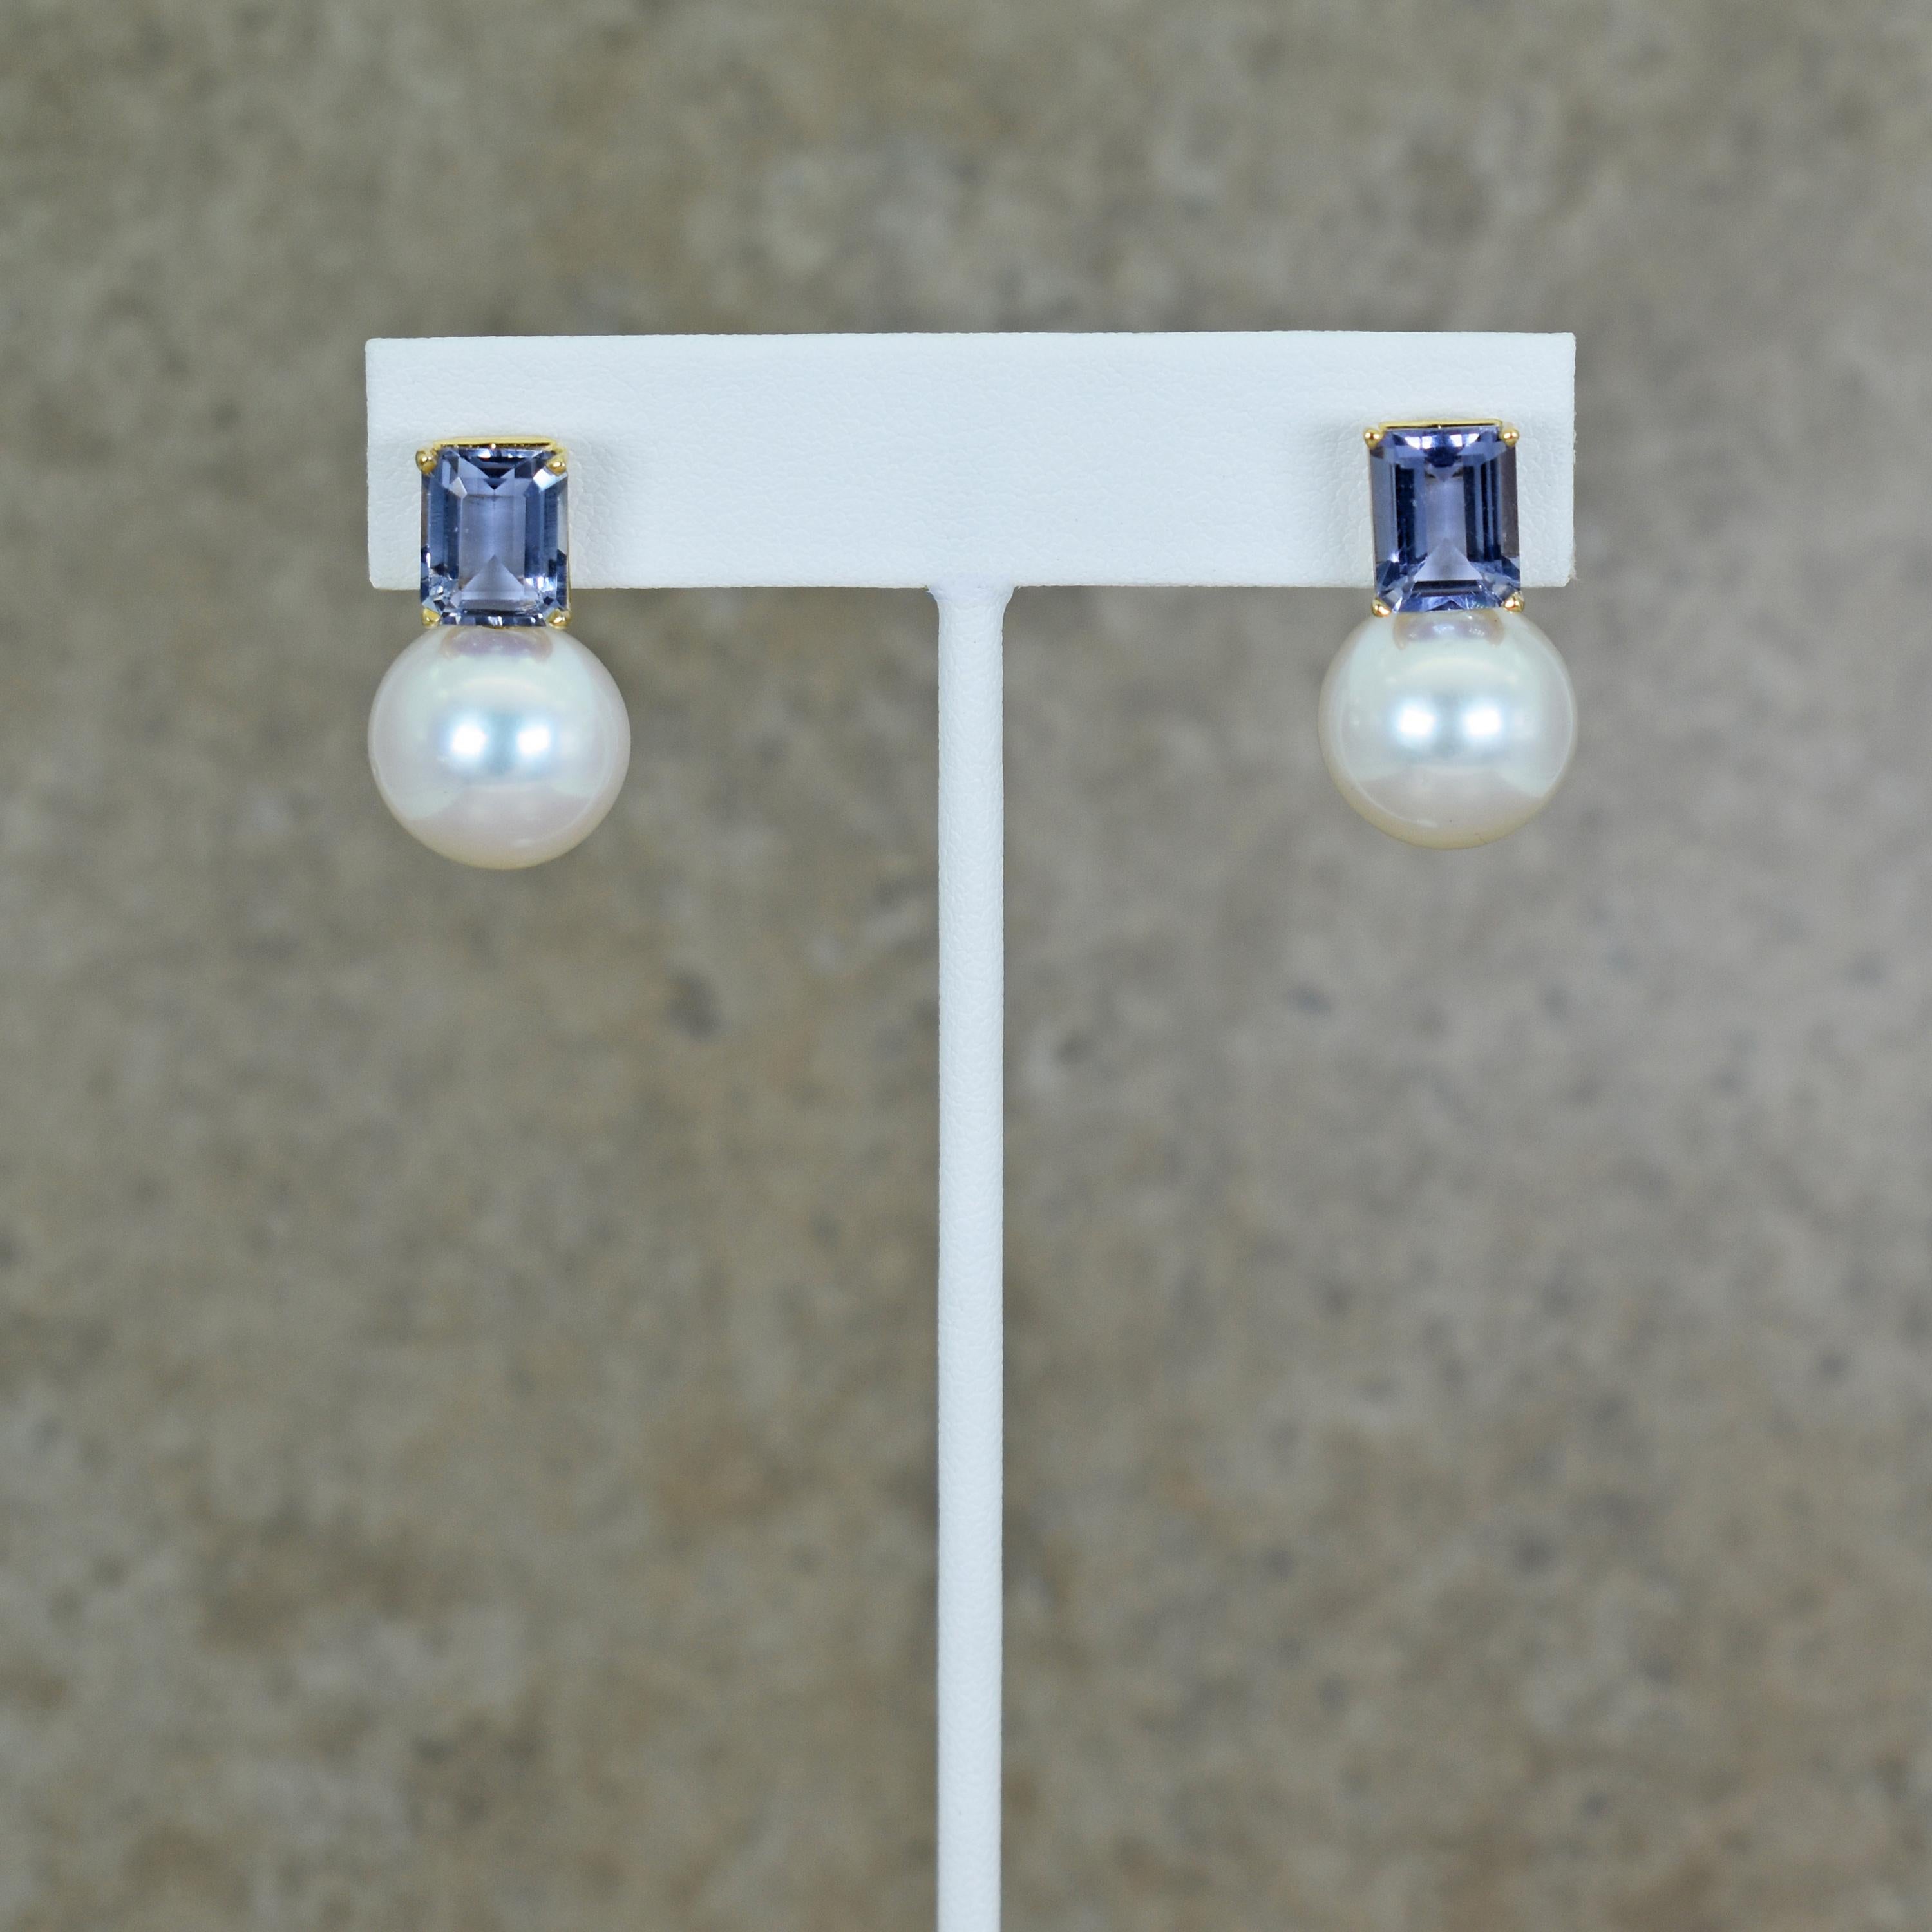 Emerald-cut 5.01 total carat Iolite and 15mm Freshwater Pearl 14k yellow gold drop stud earrings. Drop earrings are 1 inch in length. Gorgeous, light purplish-blue Iolite and beautiful Pearls in this contemporary yet timeless pair of earrings.